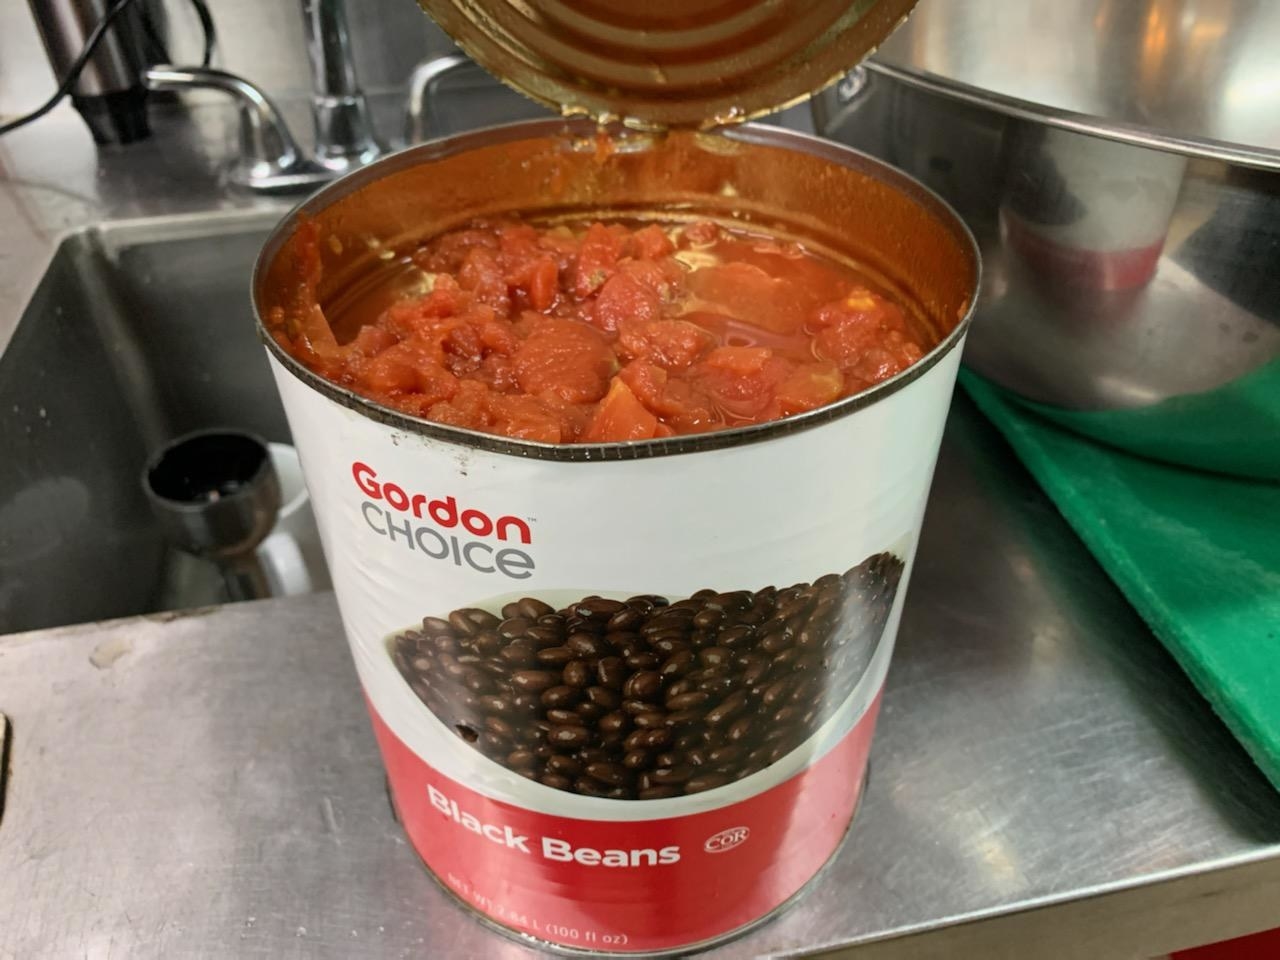 Red beans inside a ban labeled &quot;Black beans&quot;